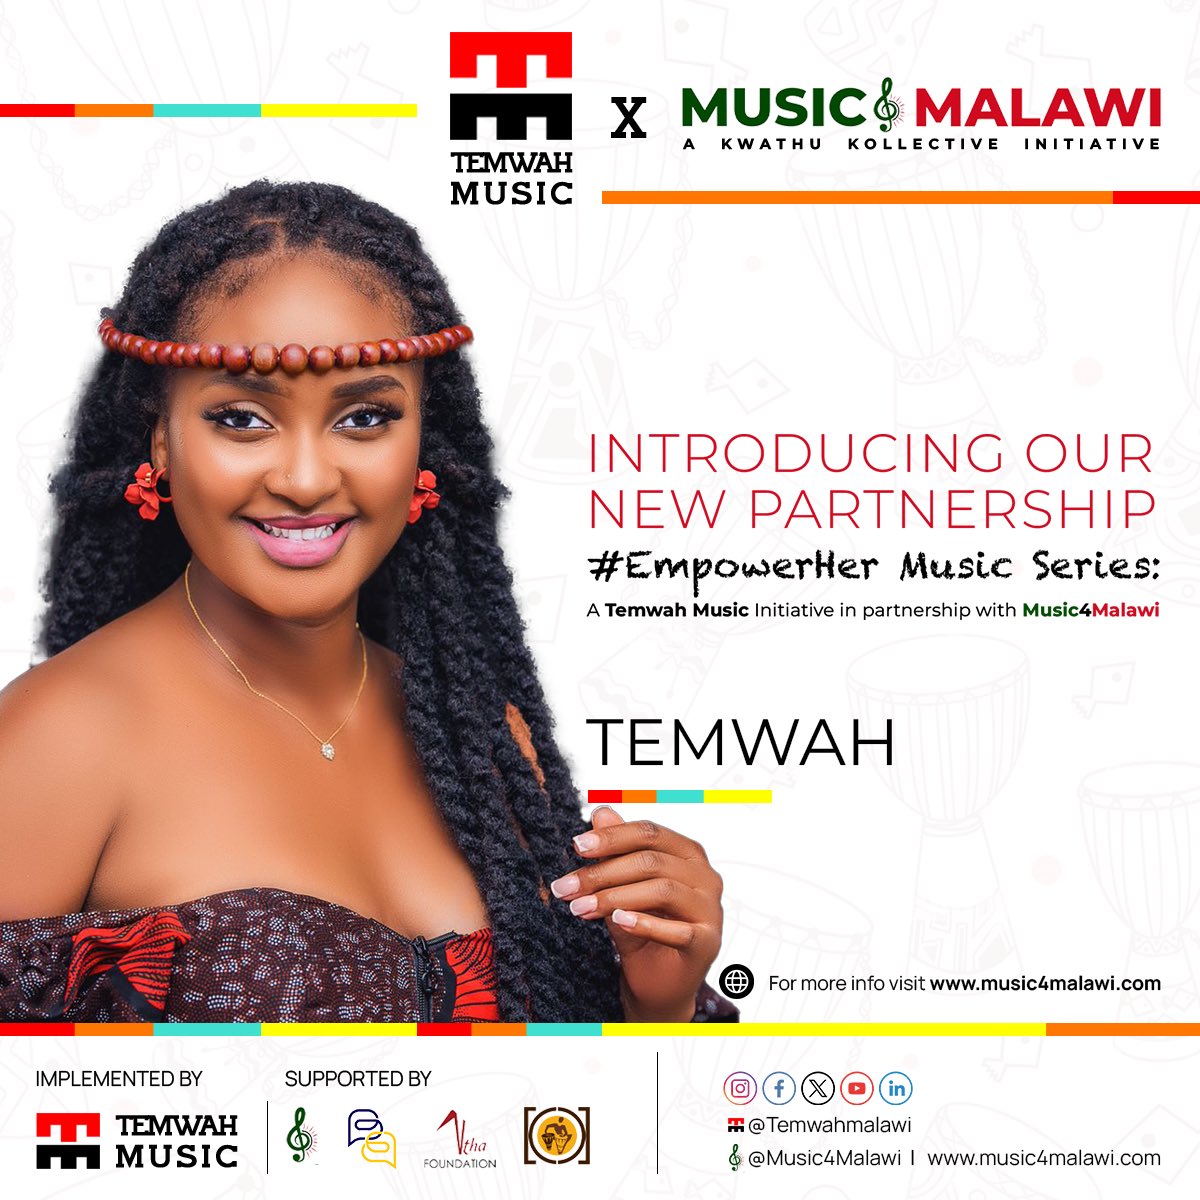 officially introducing our new partners in the empowerhermusicseries. @Music4Malawi a kwathu kollective initiative.Thanks to the CEO of Nthafoundation miss @NthandaManduwi for supporting us highly in this initiative #empowerhermusicseries #womeneninmusicbusinessMw #Temwahmusic